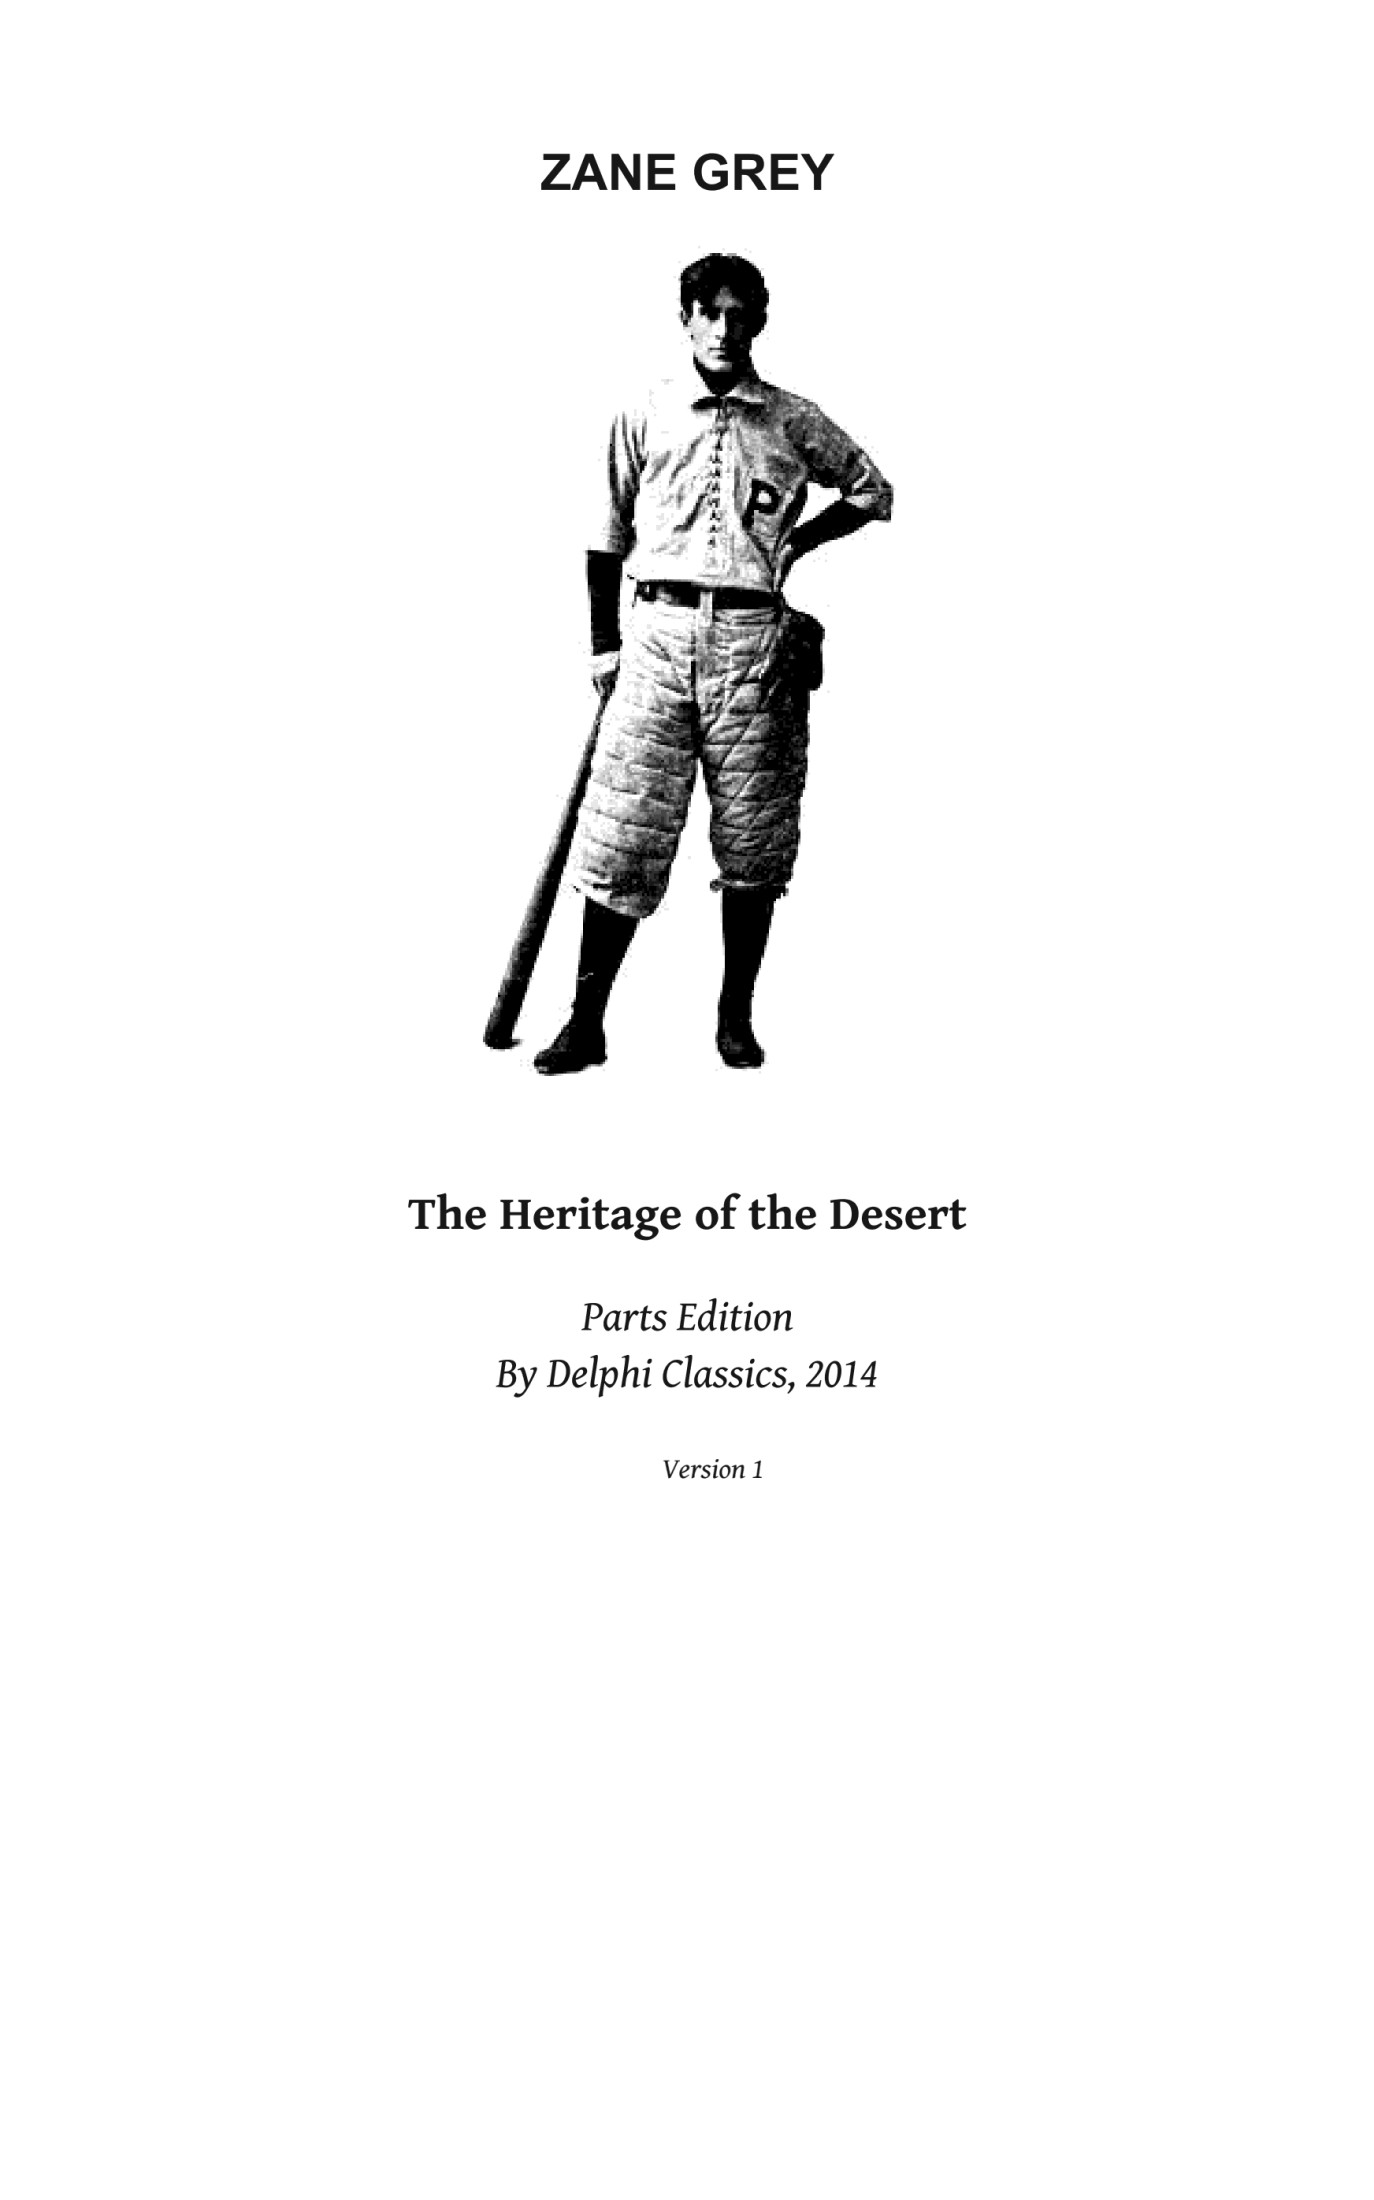 The Heritage of the Desert by Zane Grey - Delphi Classics (Illustrated)